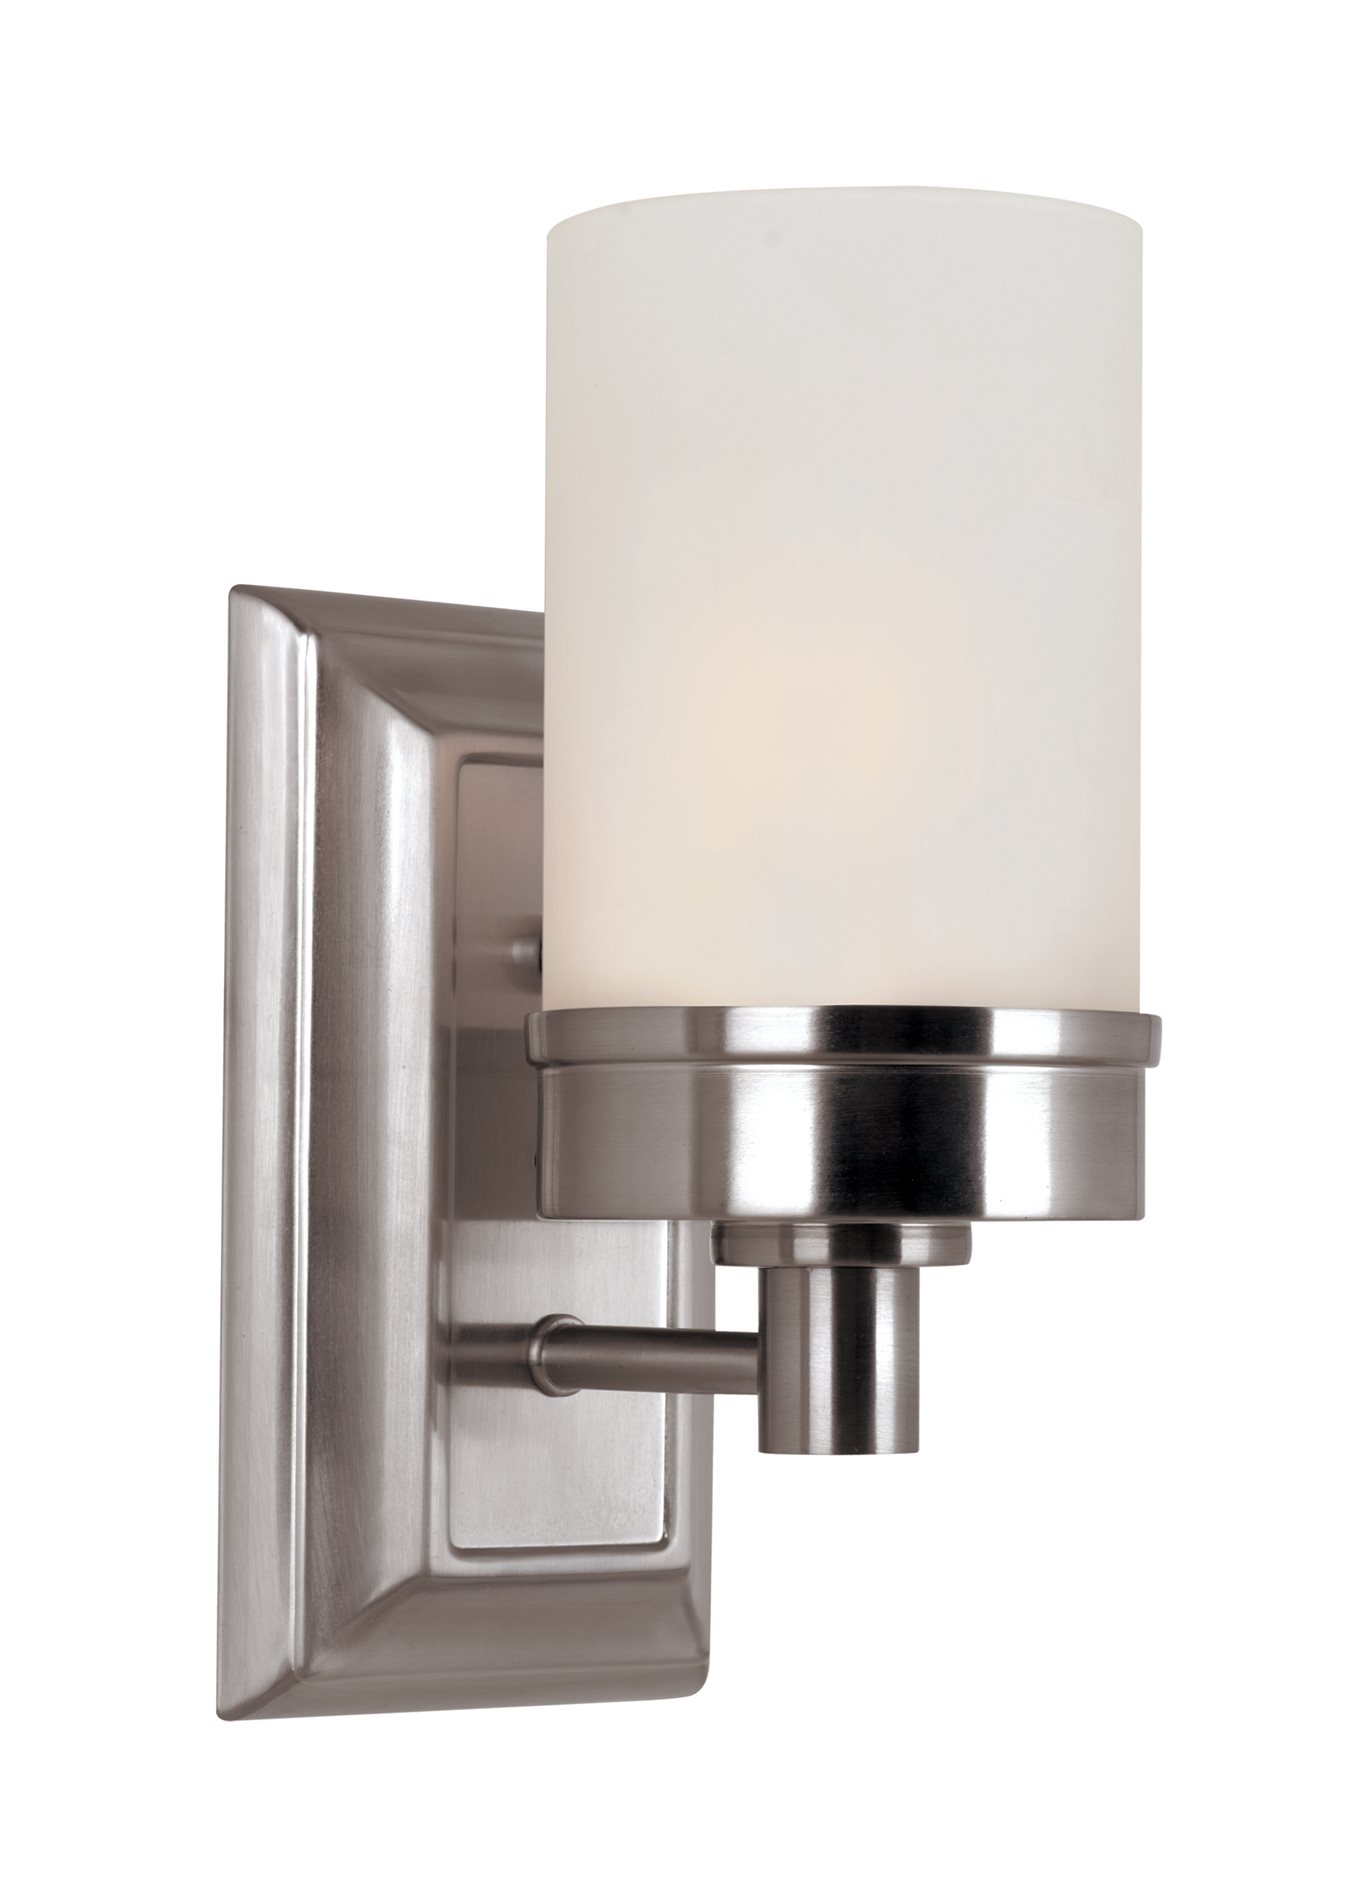 Trans Globe Lighting - Urban Swag - One Light Wall Sconce - image 2 of 2